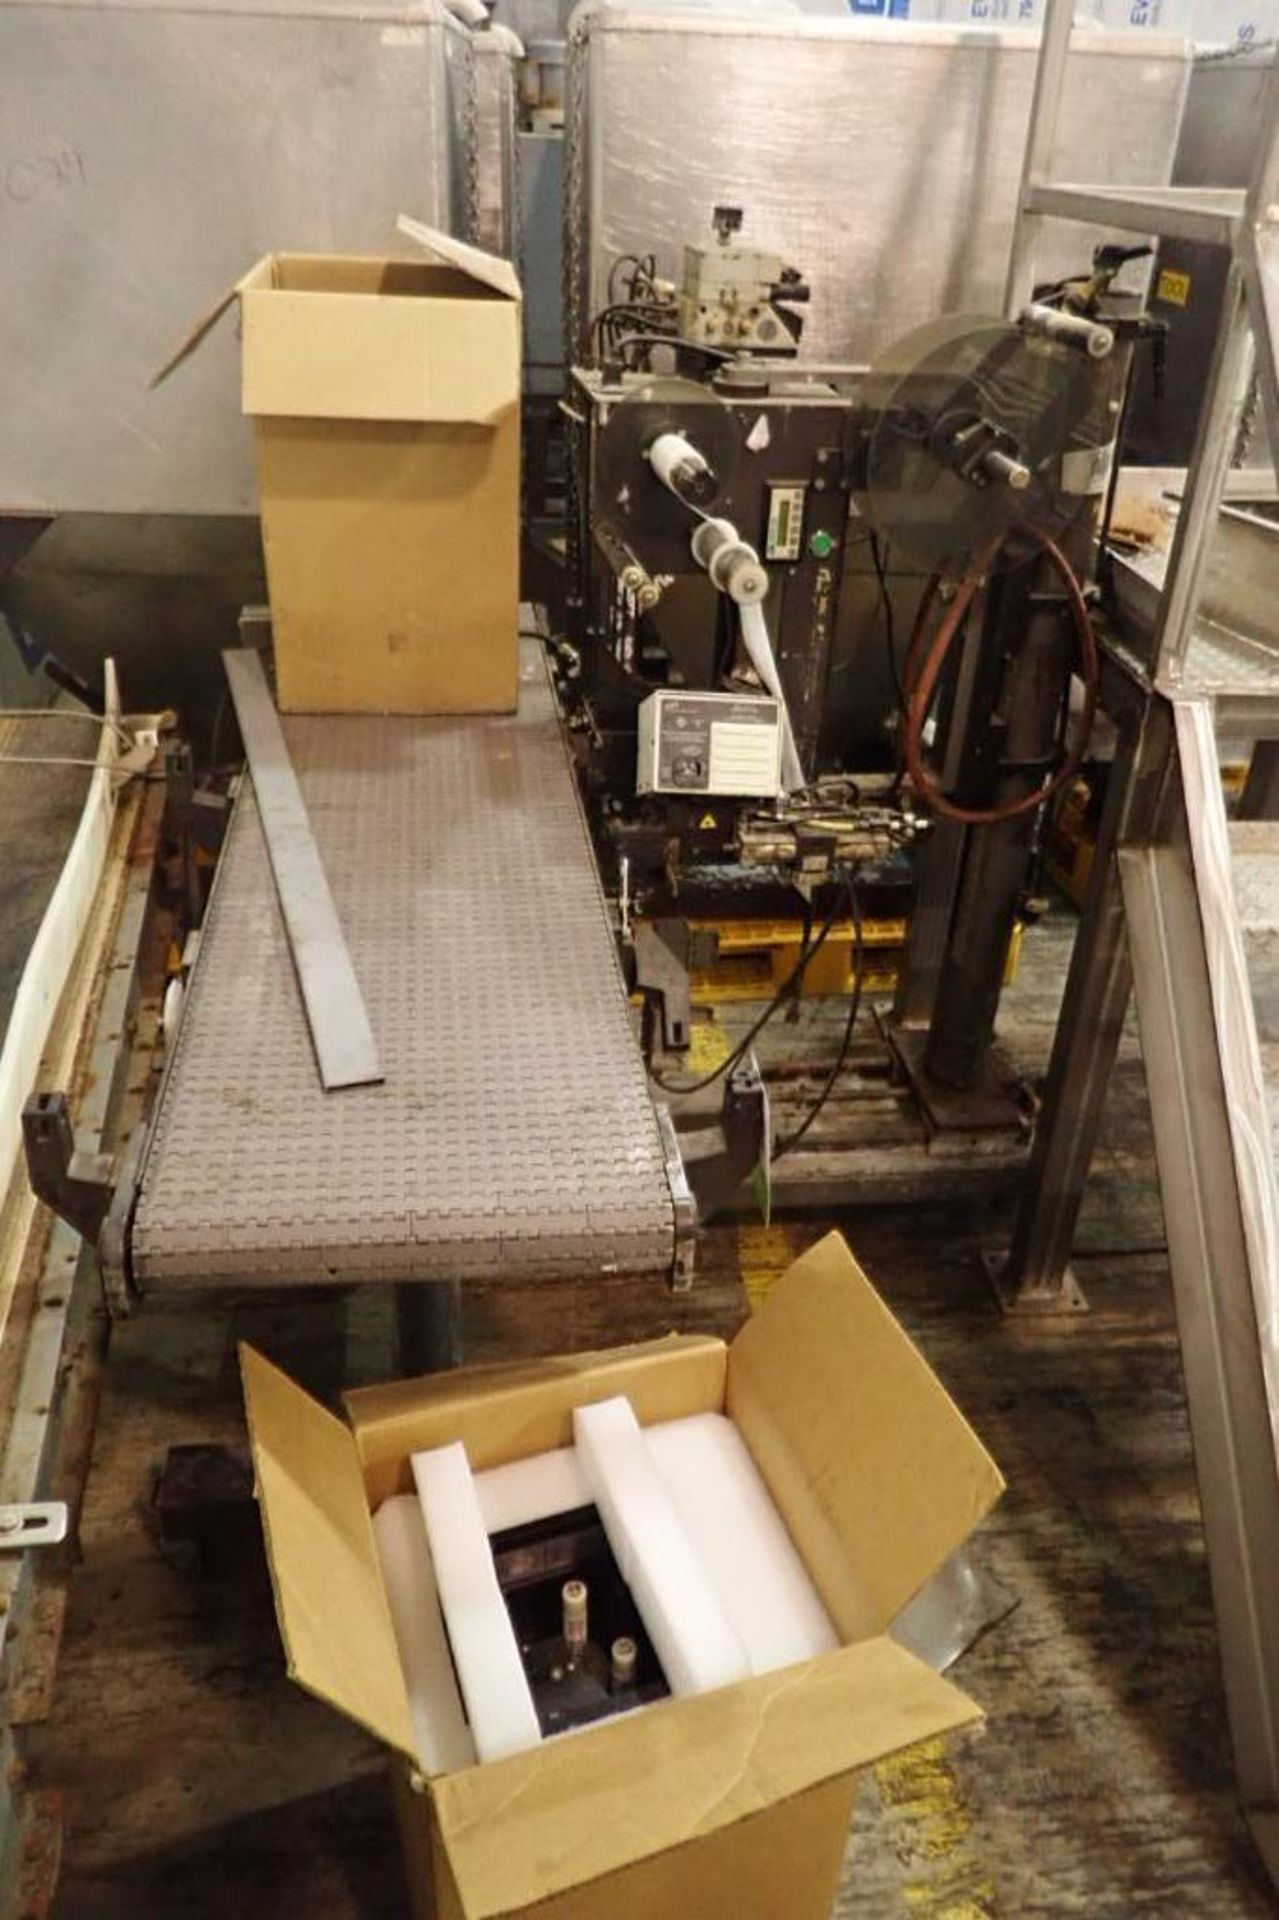 CTM labeler with feed conveyor, mounted on mild steel frame on wheels, with (2) Sato printers, Model